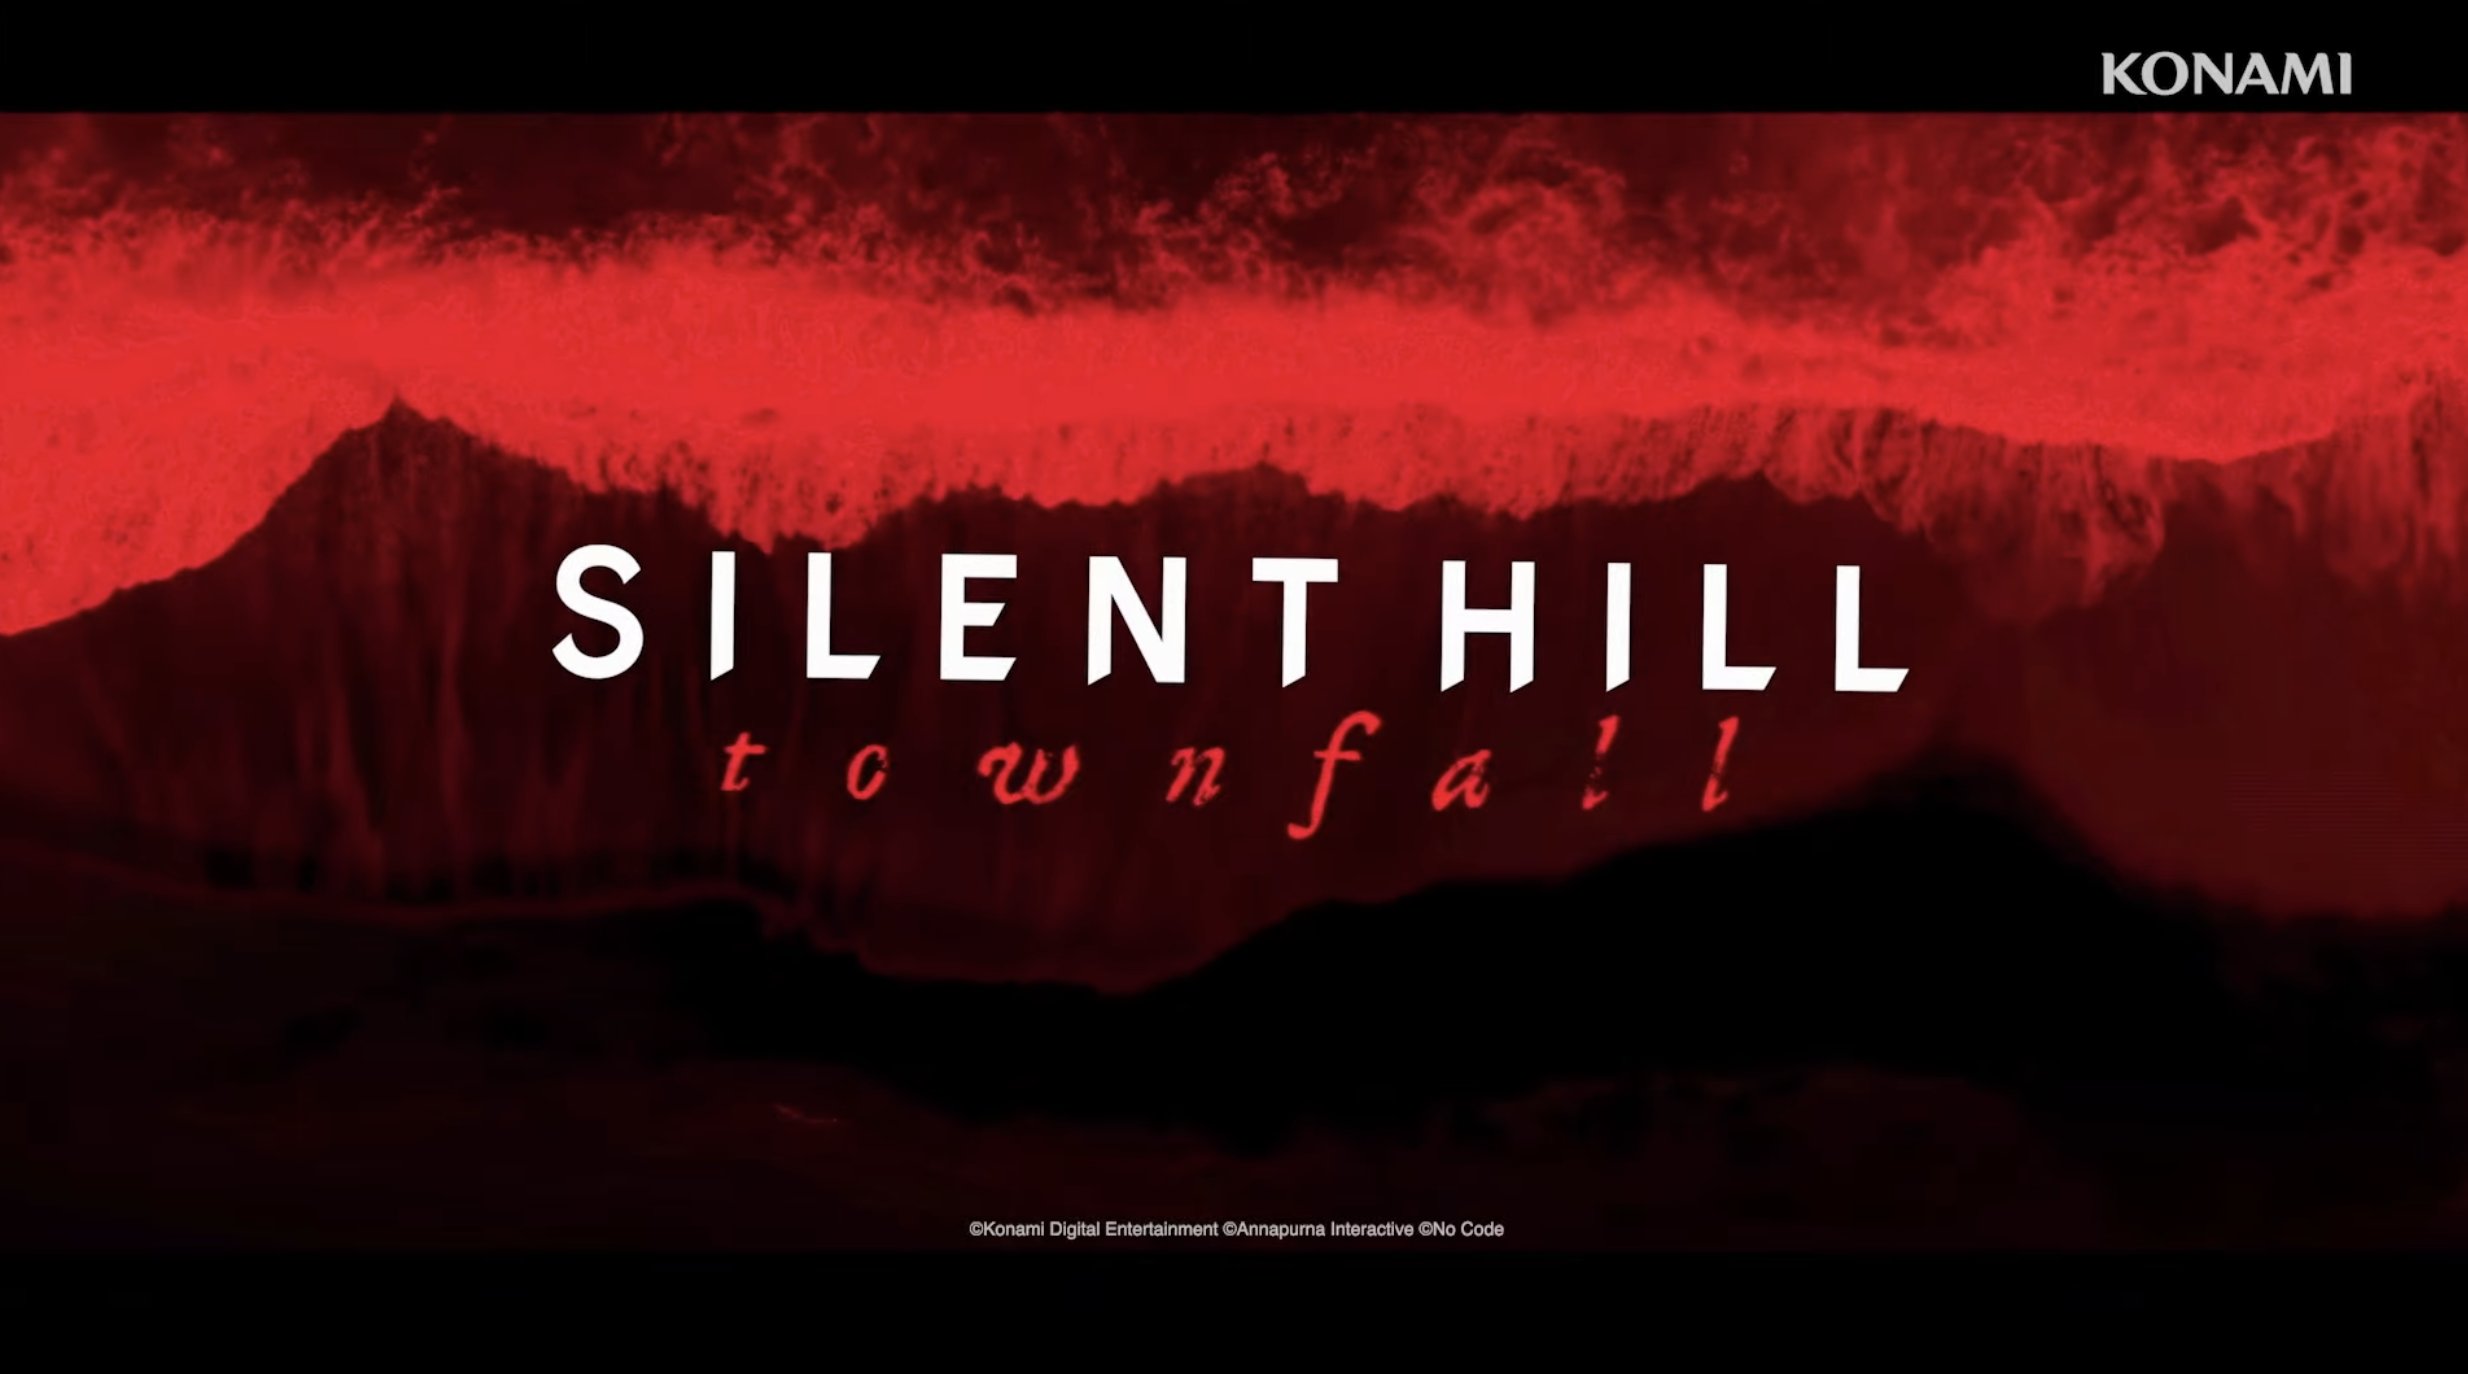 With three drastically distinct games, the Silent Hill world is growing